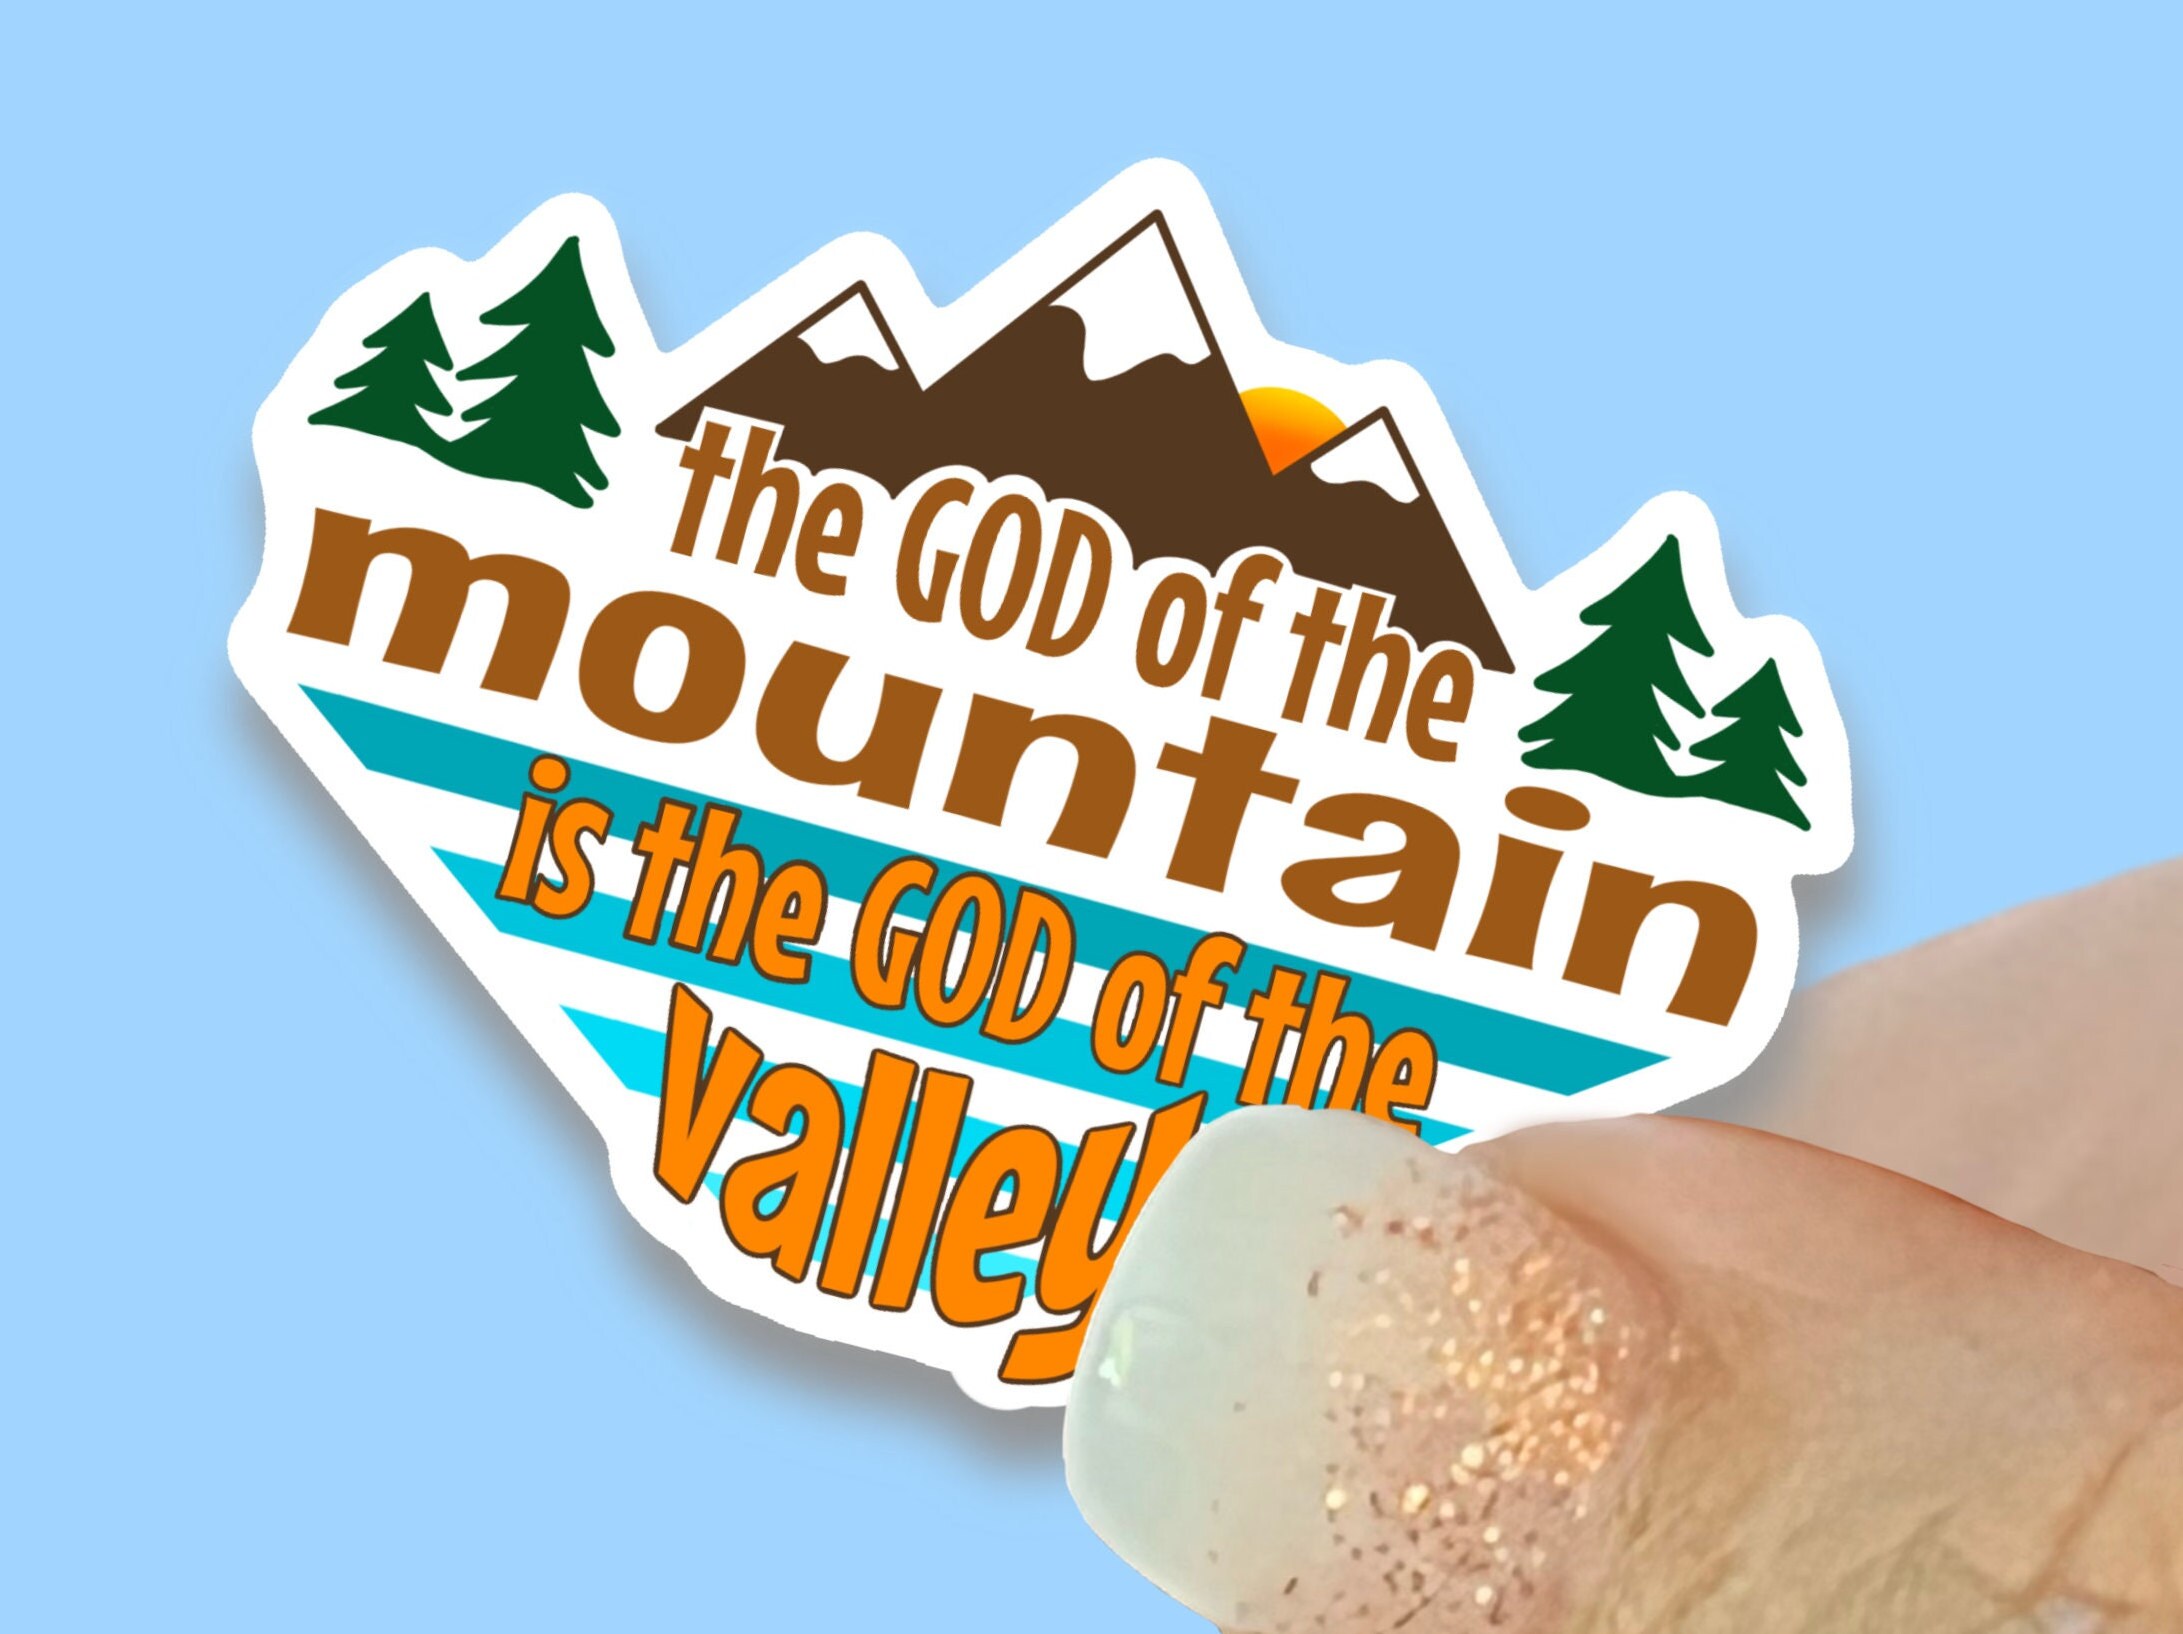 Christian Label, Faith Sticker, Scripture Label, Bible Stickers, Religious  Decal, Mountain Sticker, the God on the Mountain Label, Vinyl 